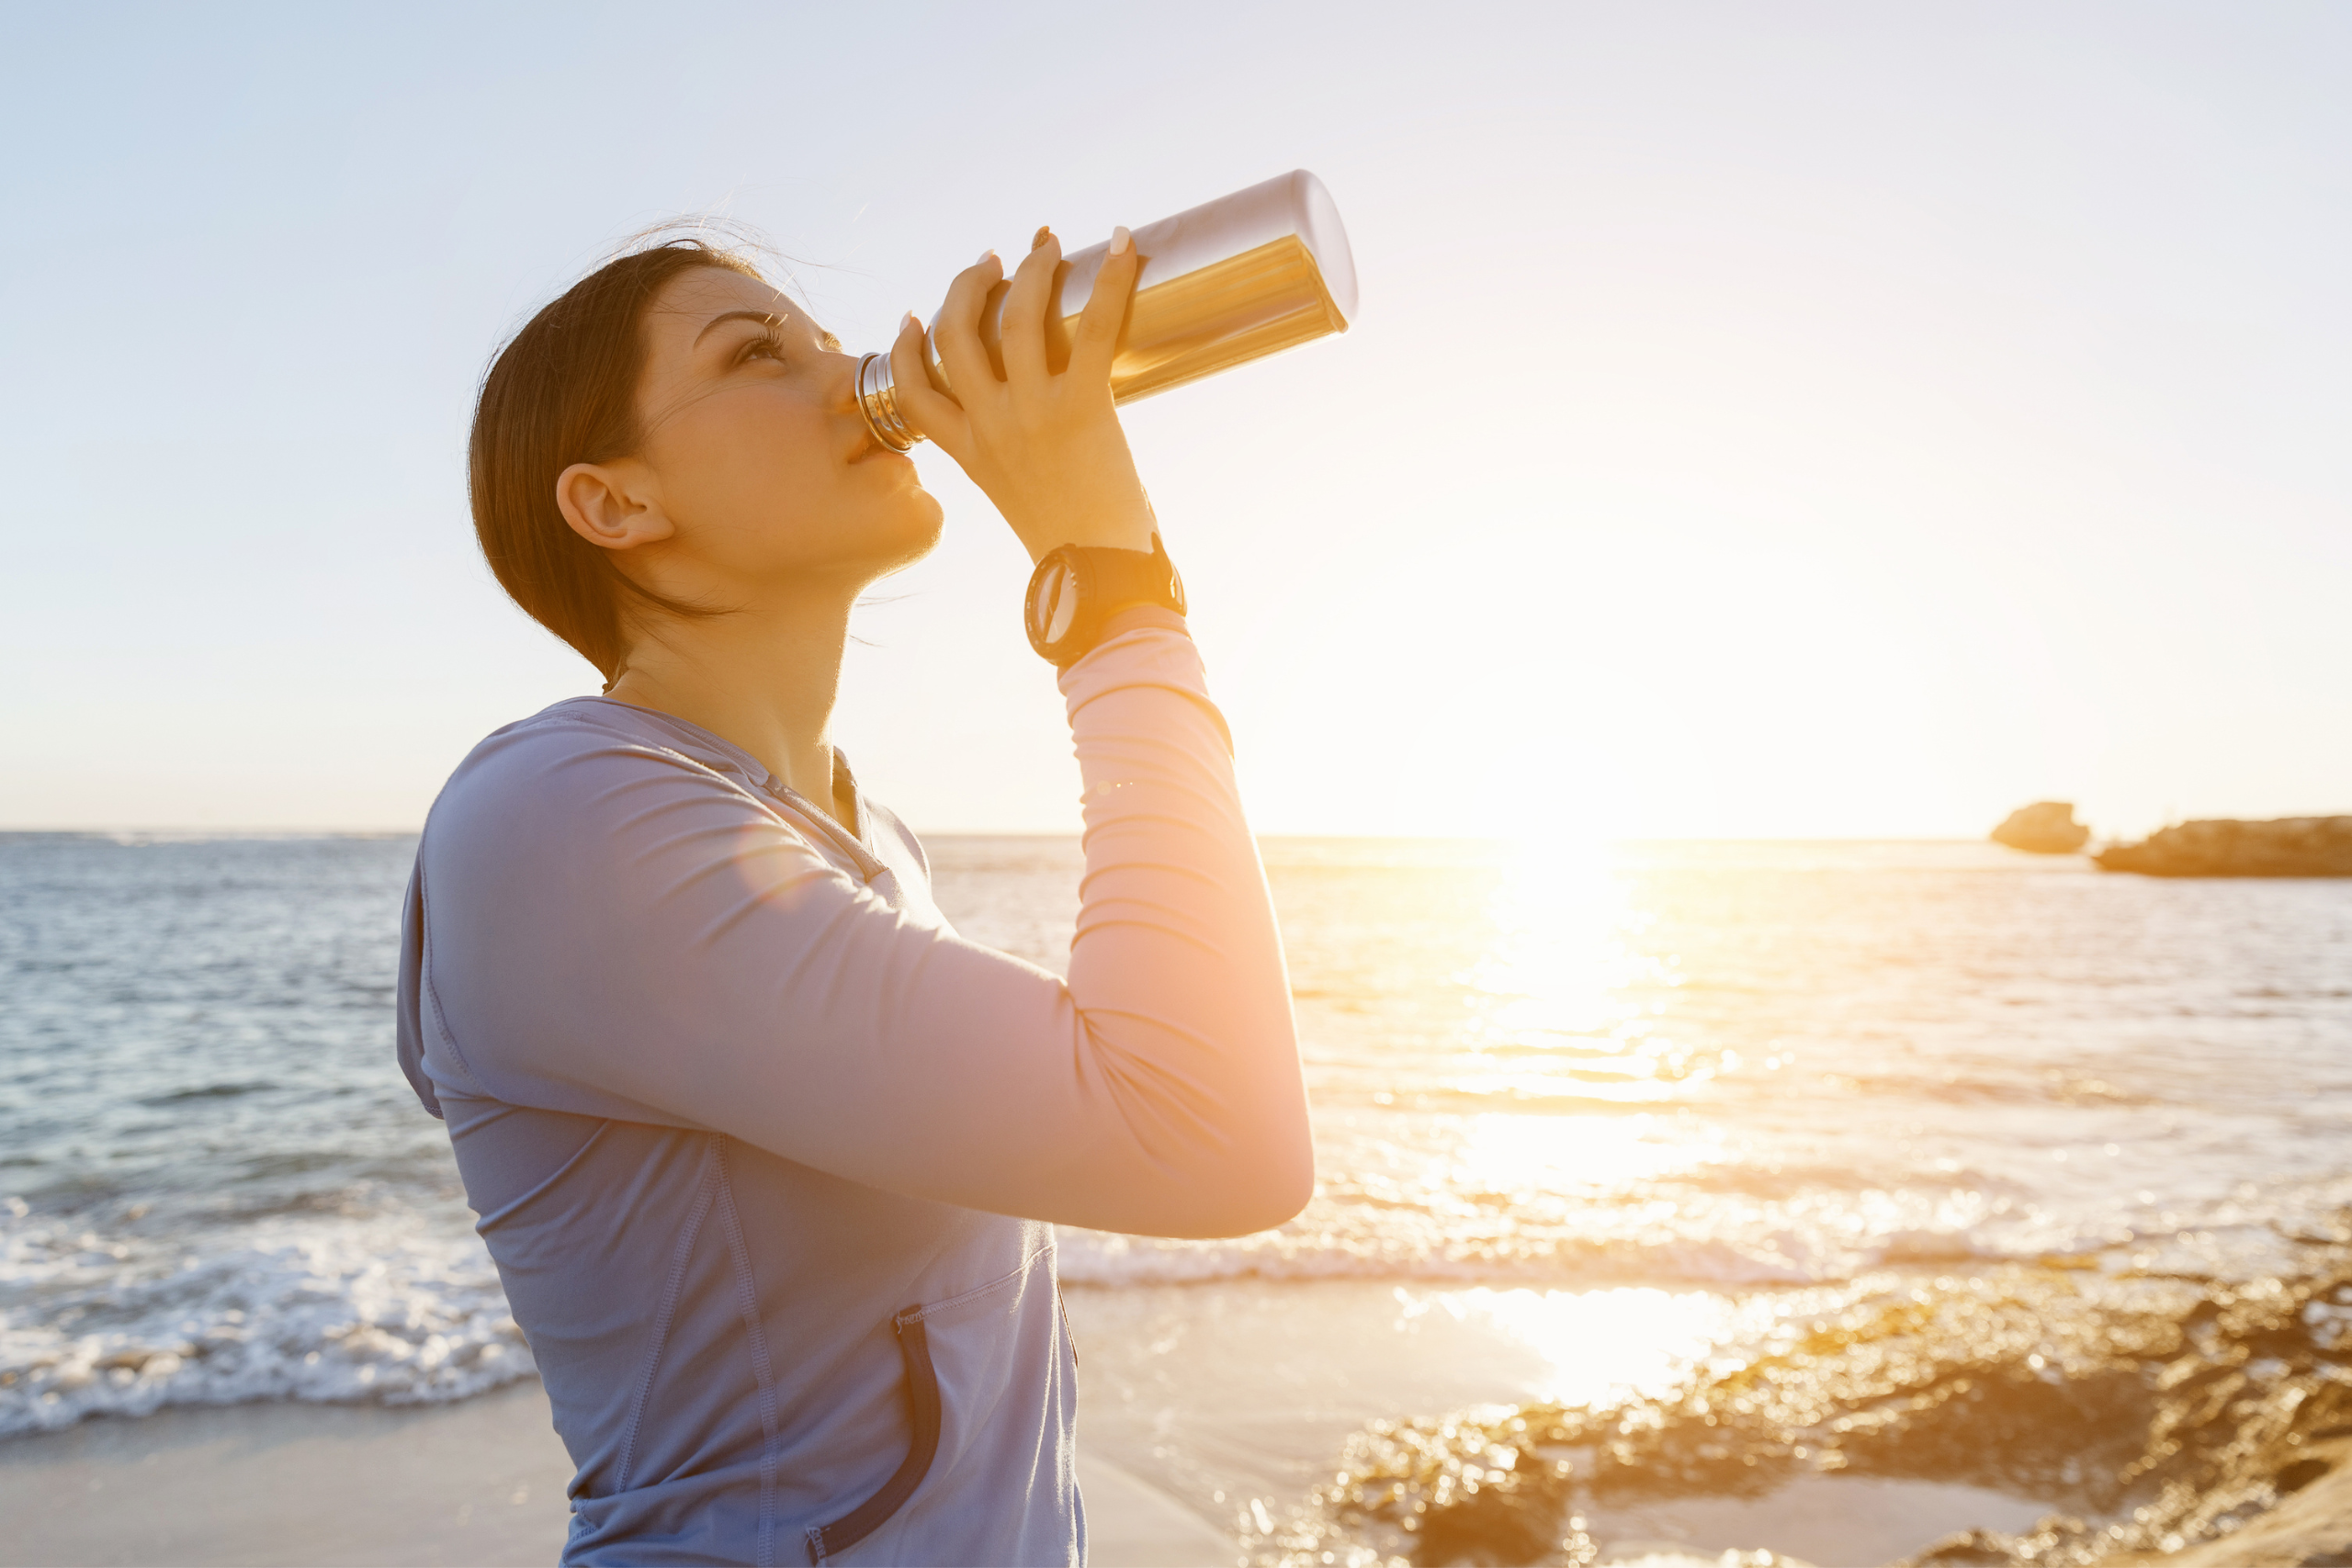 Am I dehydrated? Avoid dehydration this summer with the knowledge of symptoms, causes, and preventative methods.